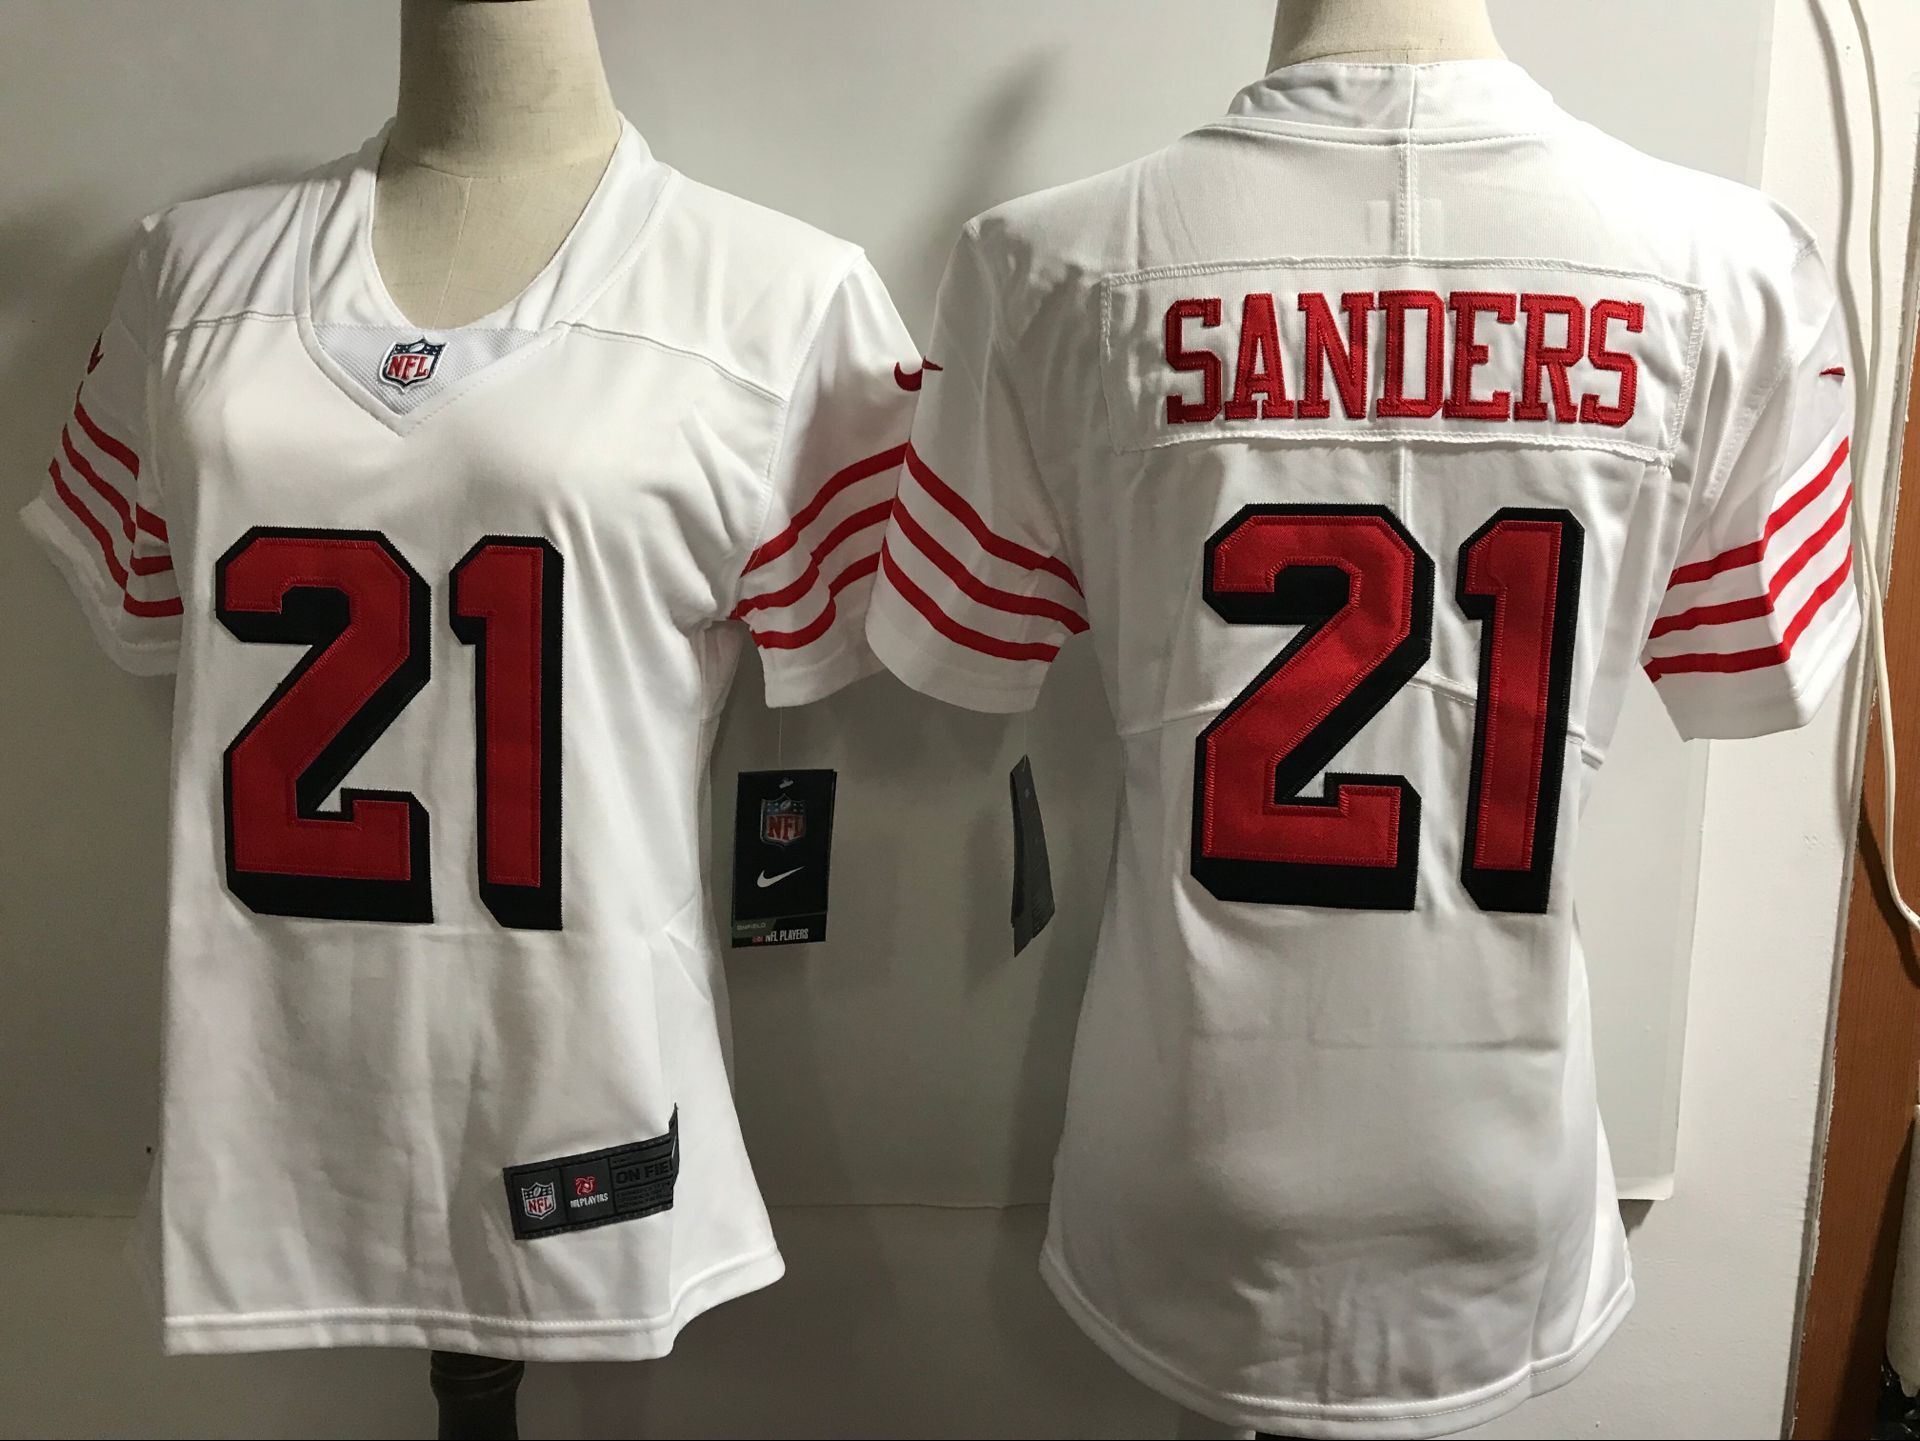 Womens NFL San Francisco 49ers 21 Sanders White Color Rush Jersey